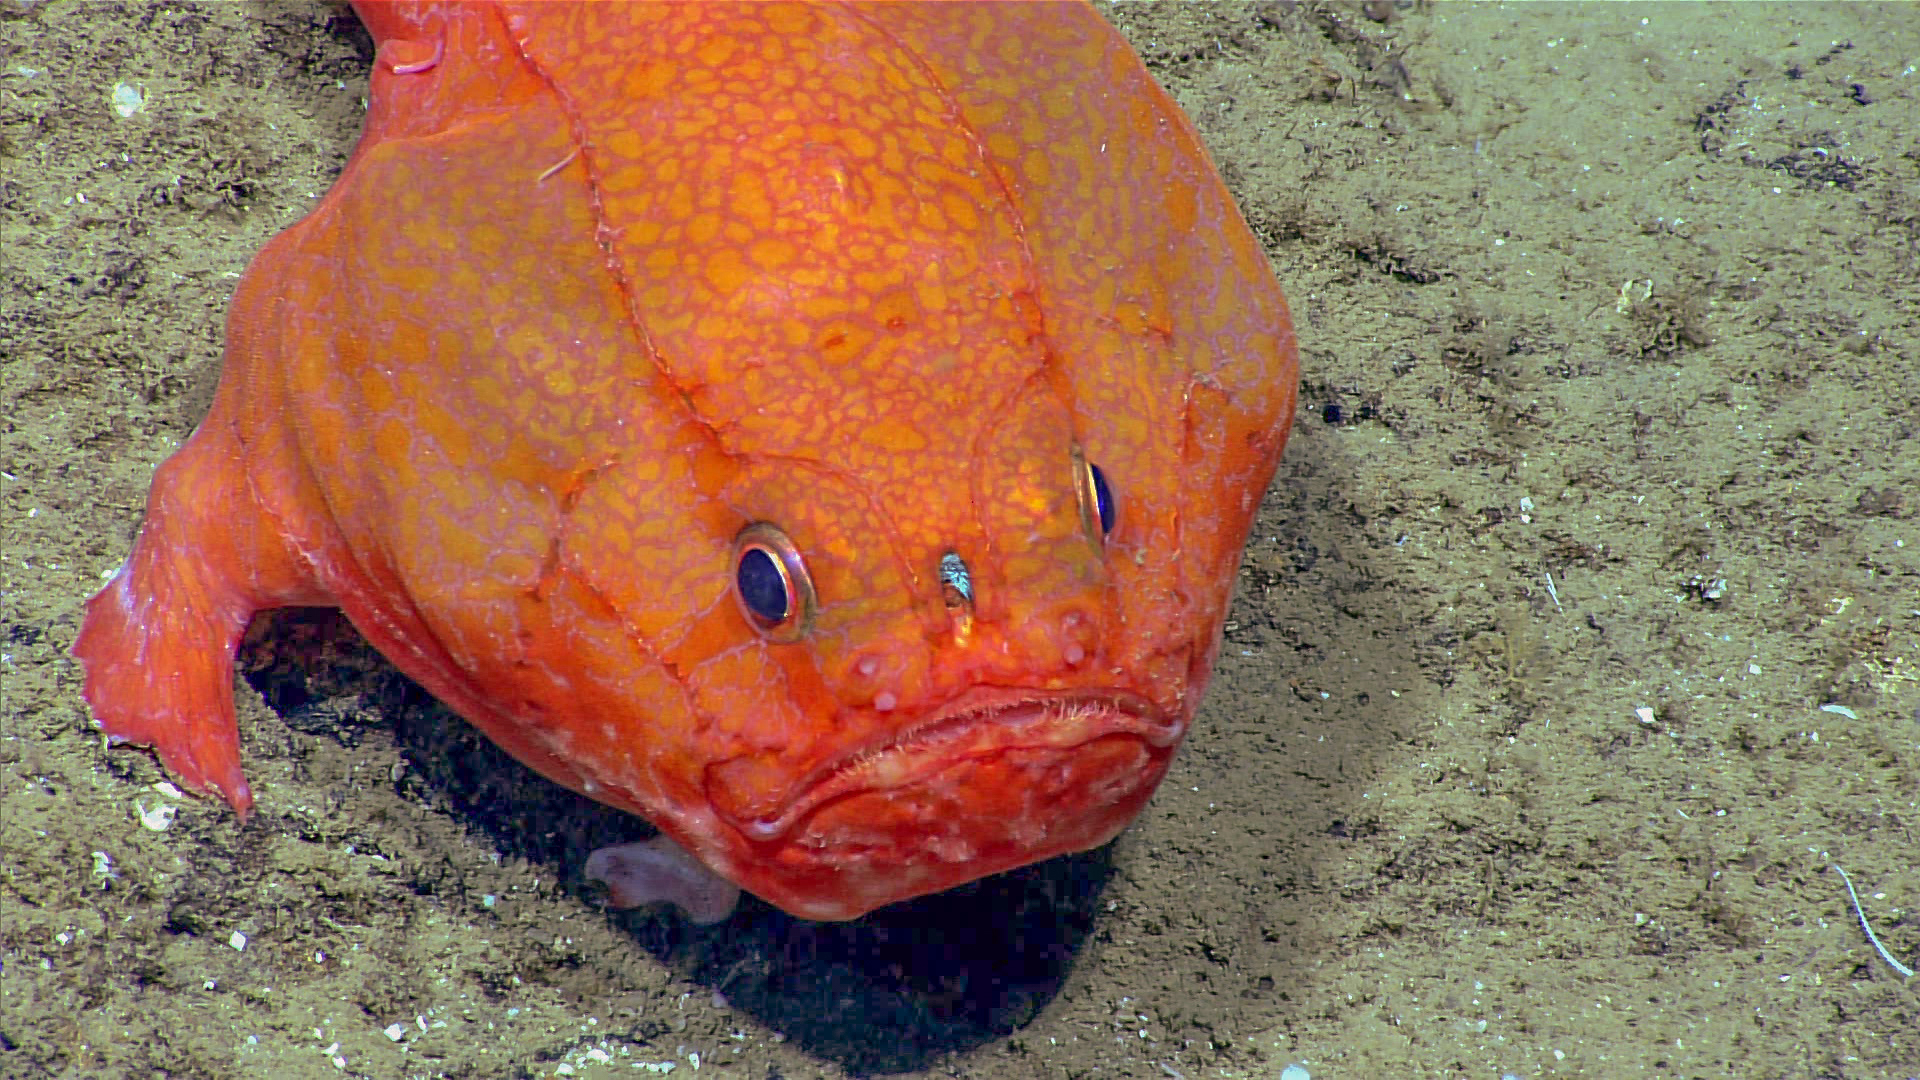 This toadfish was seen during Dive 05 of the third Voyage to the Ridge 2022 expedition.